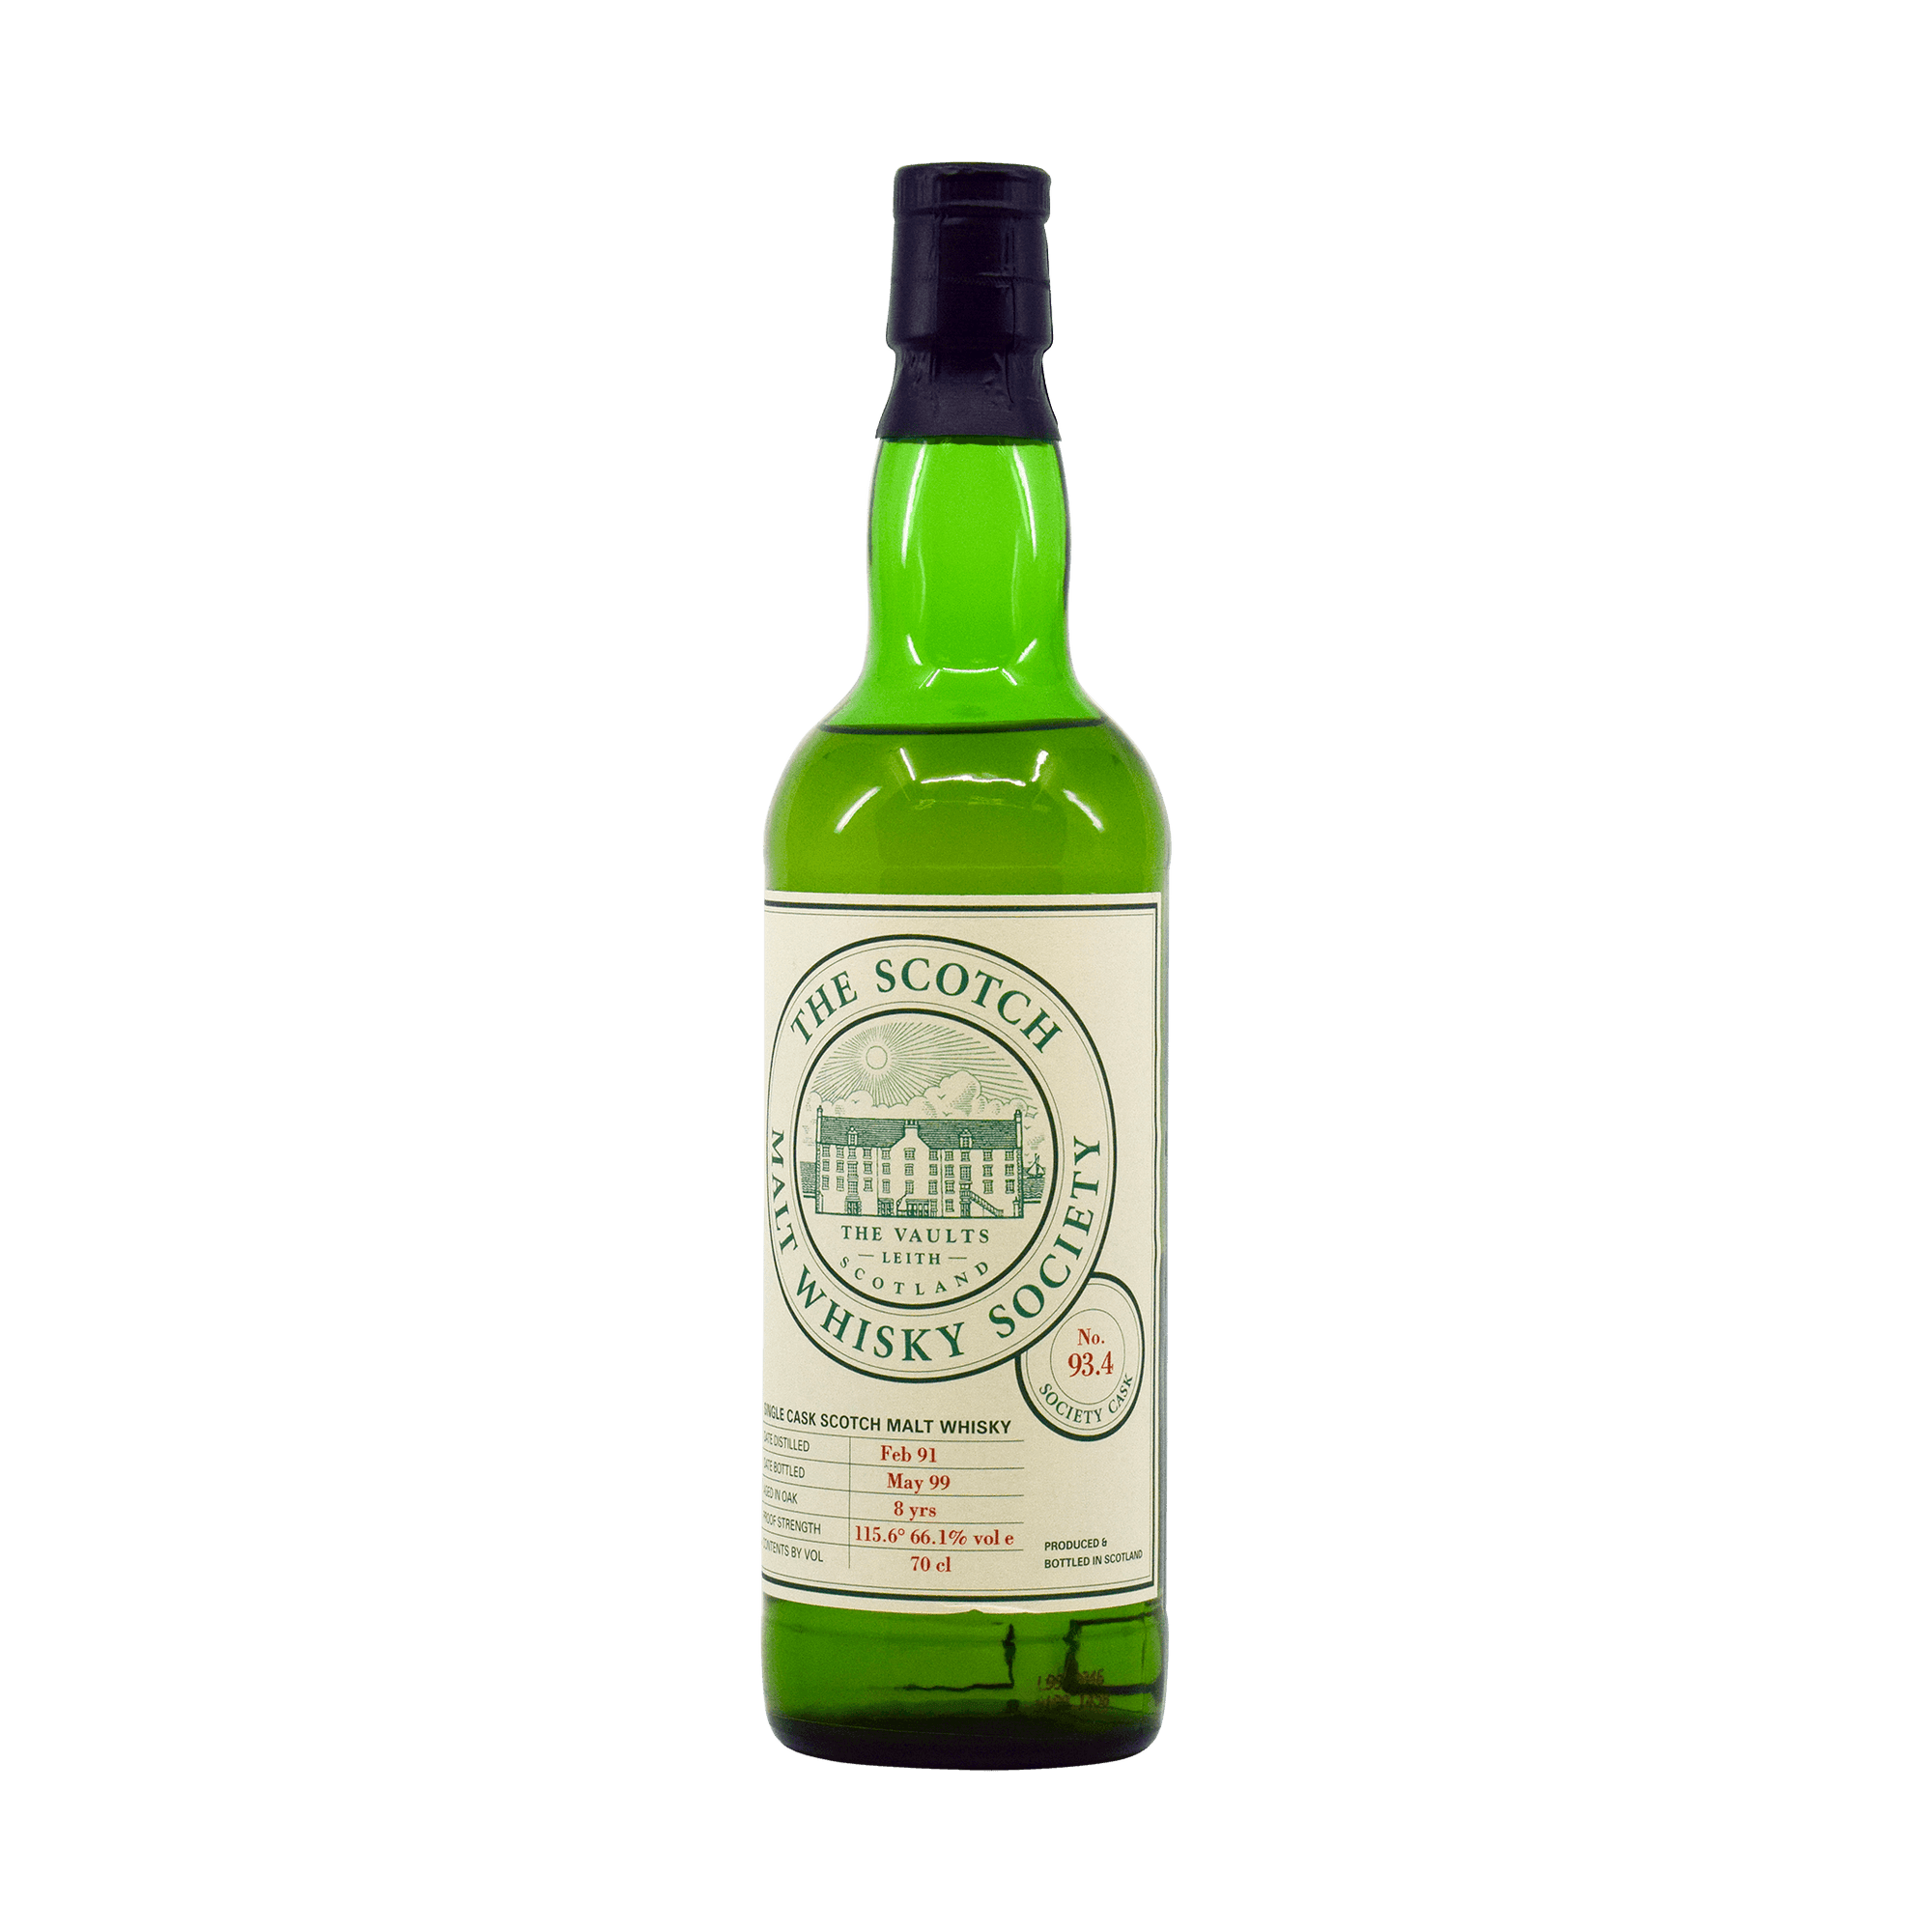 Glen Scotia 1991 8 Year Old '93.4' SMWS 66.10% 70cl